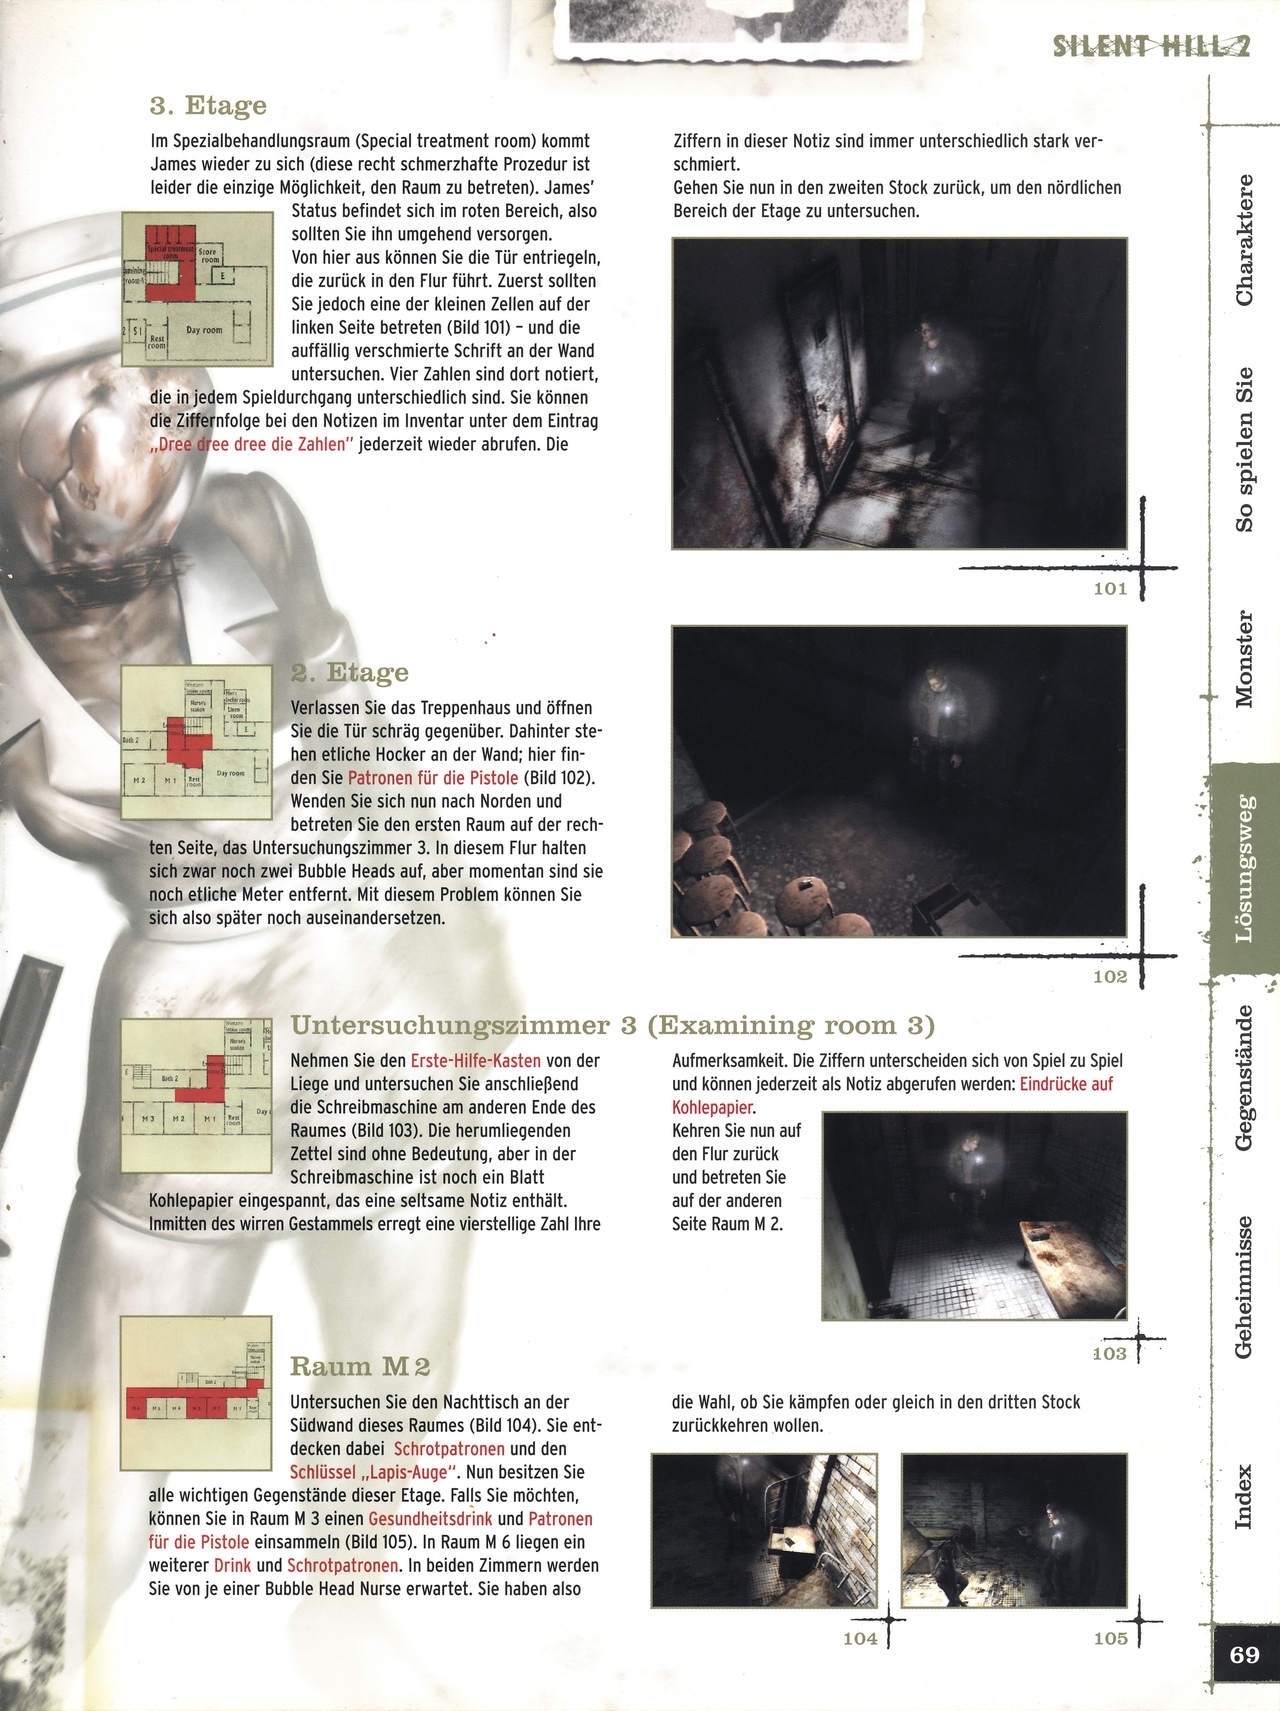 Silent Hill 2 Official Strategy Guide Authoritzed Collection 68